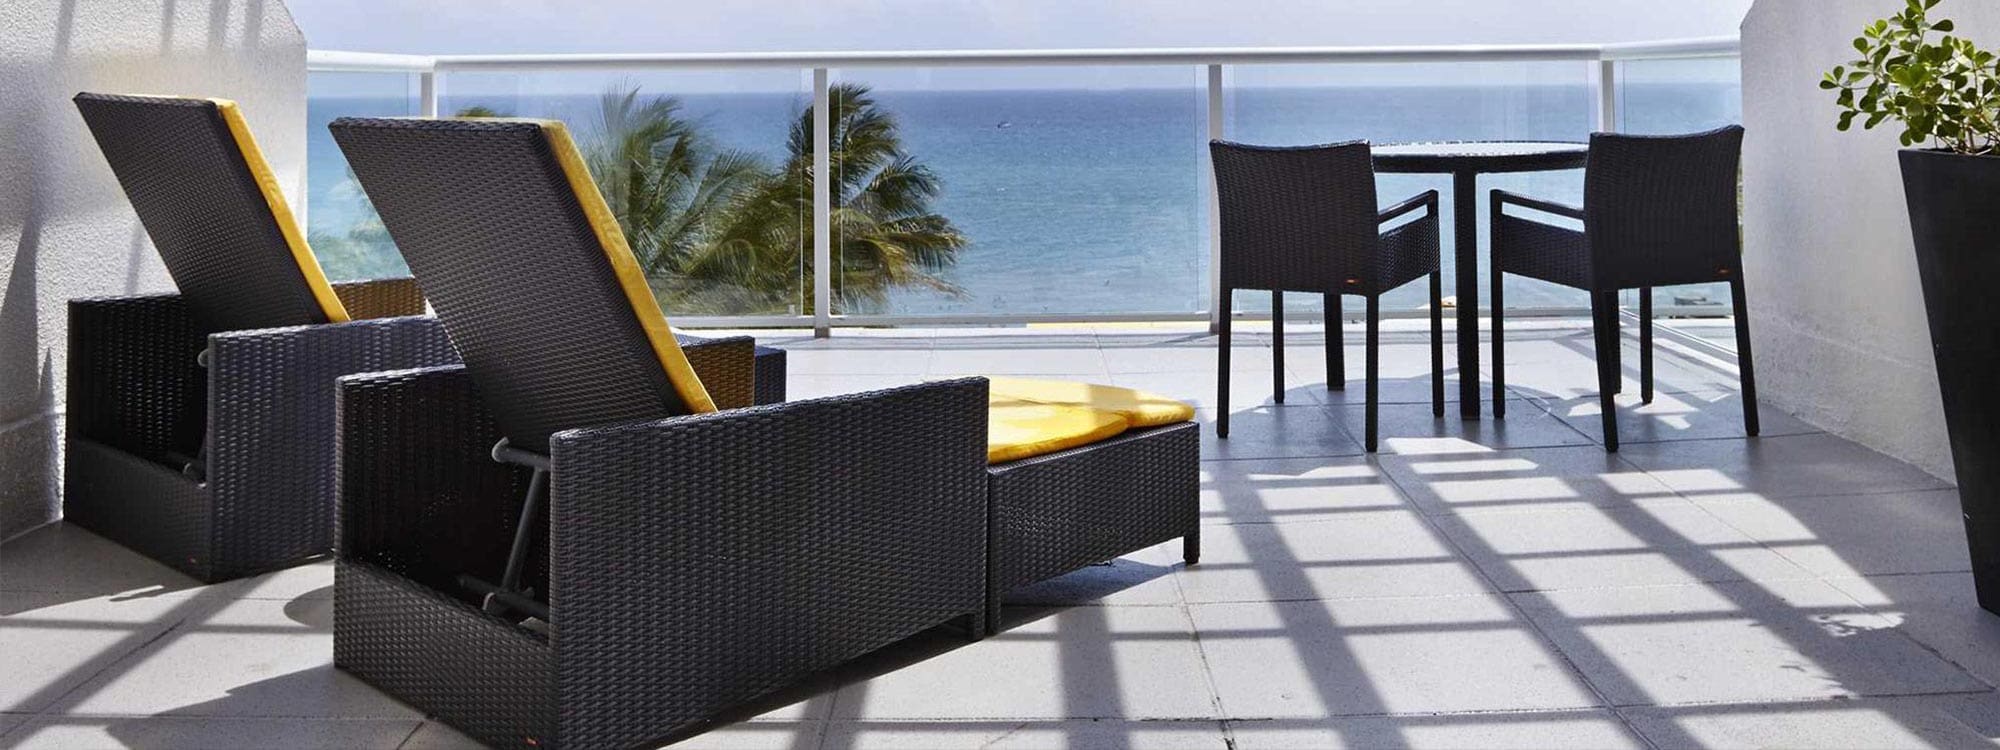 Image of contemporary sunbed from Encompass Furniture at Boca Beach Club, USA